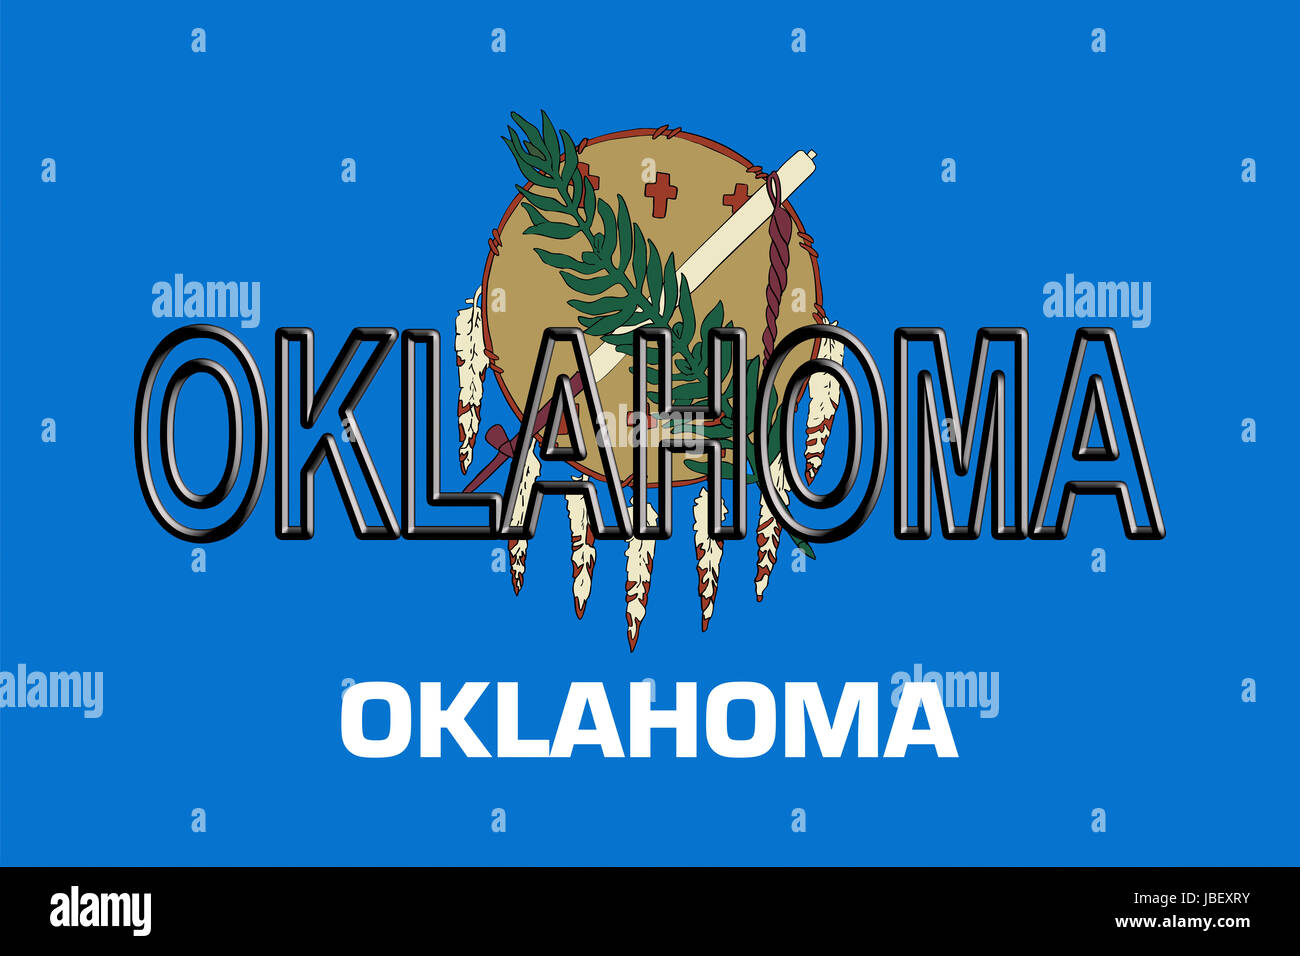 Illustration of the flag of Oklahomastate in America with the state written on the flag. Stock Photo